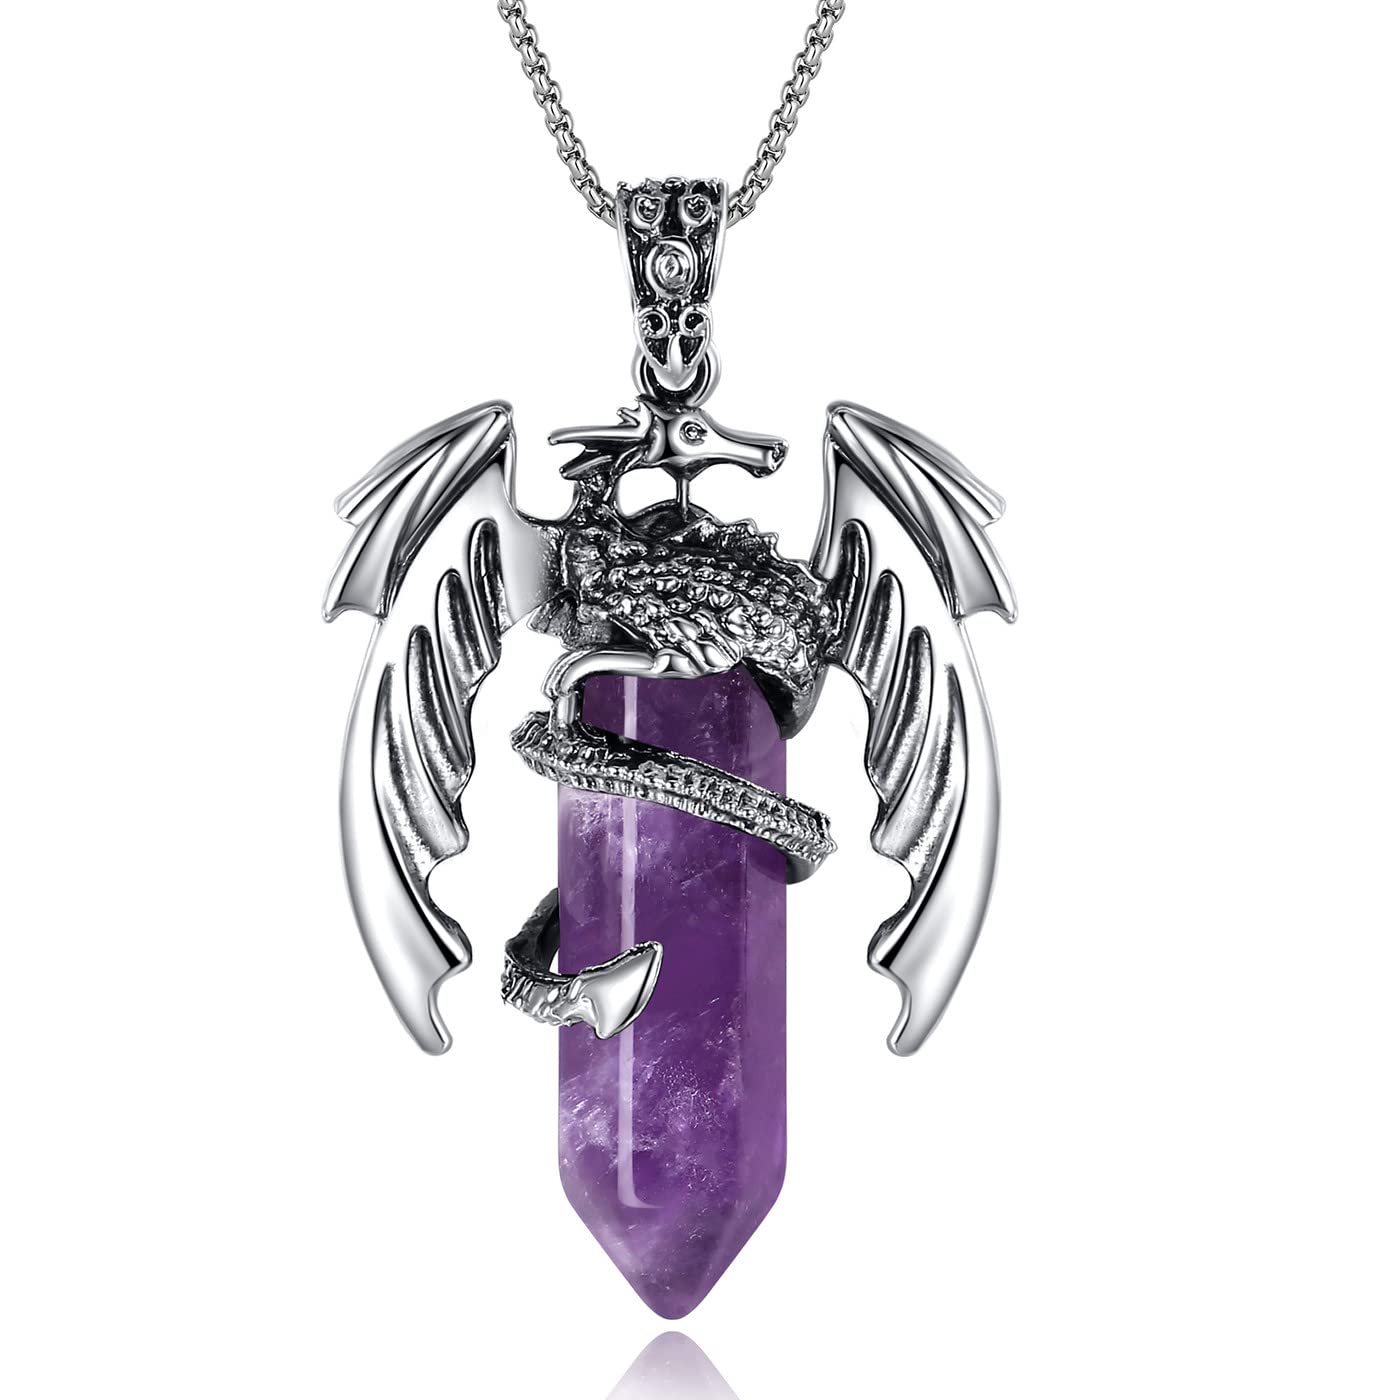 XIANNVXI Crystal Healing Stone Necklace for Men Women Amethyst Vintage Dragon Necklace Cool Simple Retro Natural Reiki Spirtural Witch Gemstone Pendant Jewelry